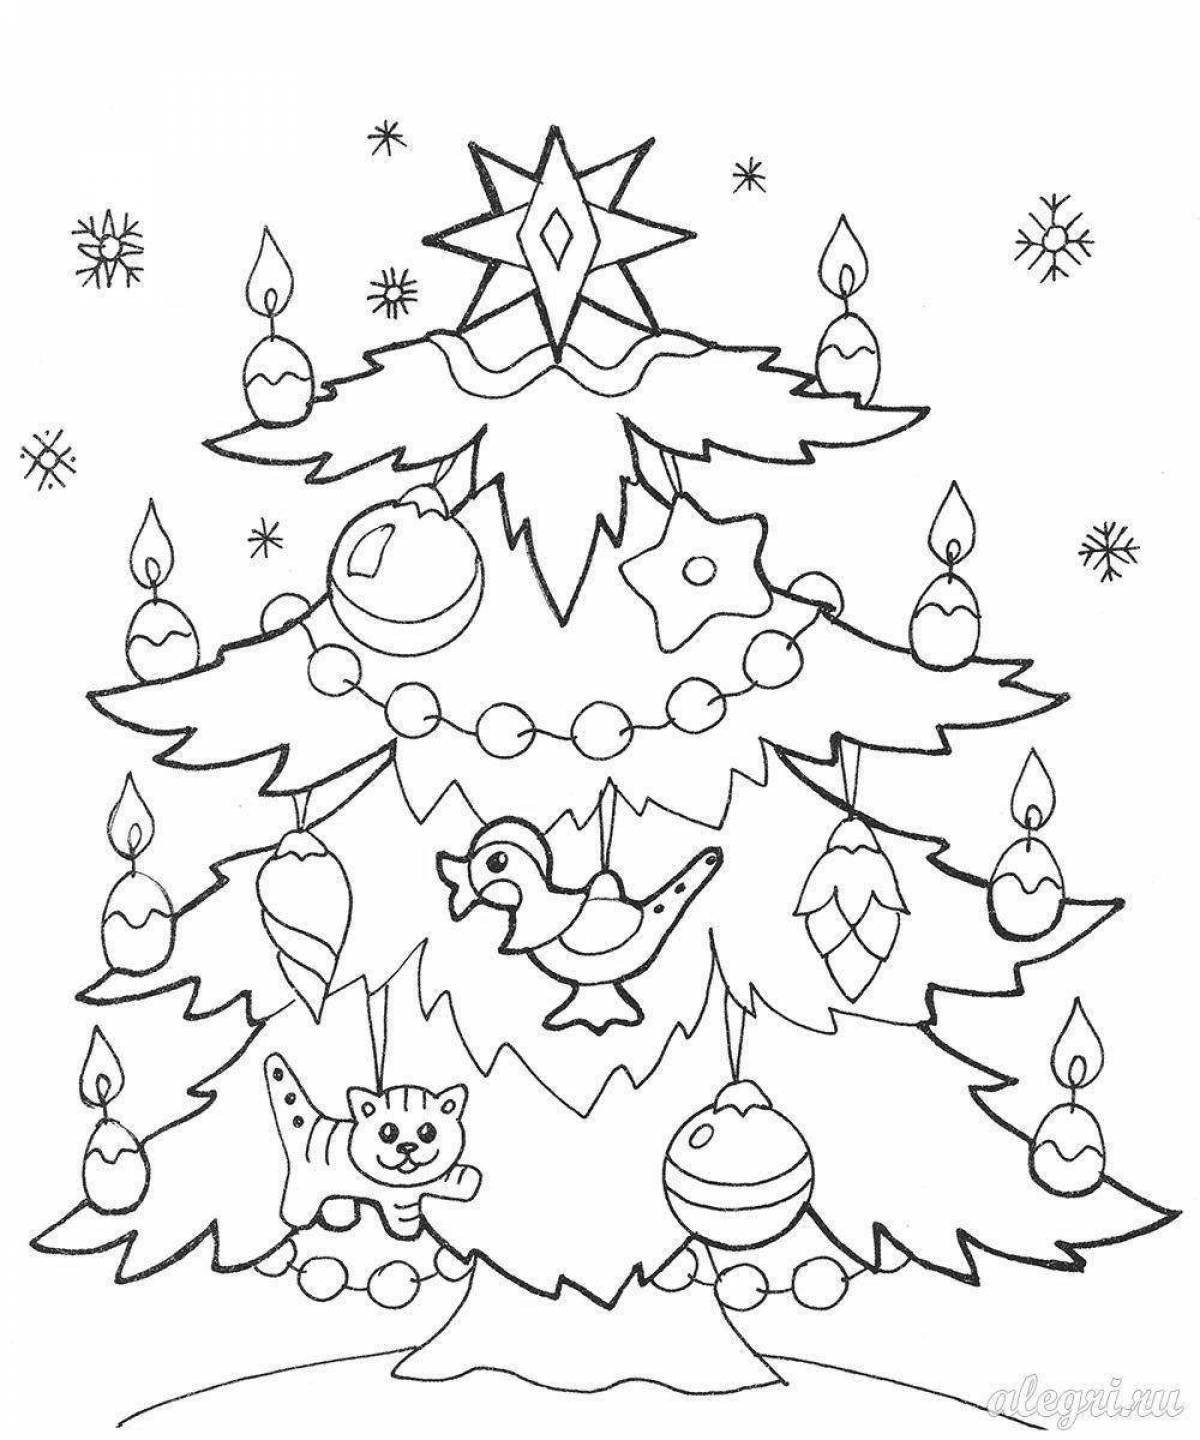 Glowing Christmas tree coloring book for children 5-6 years old